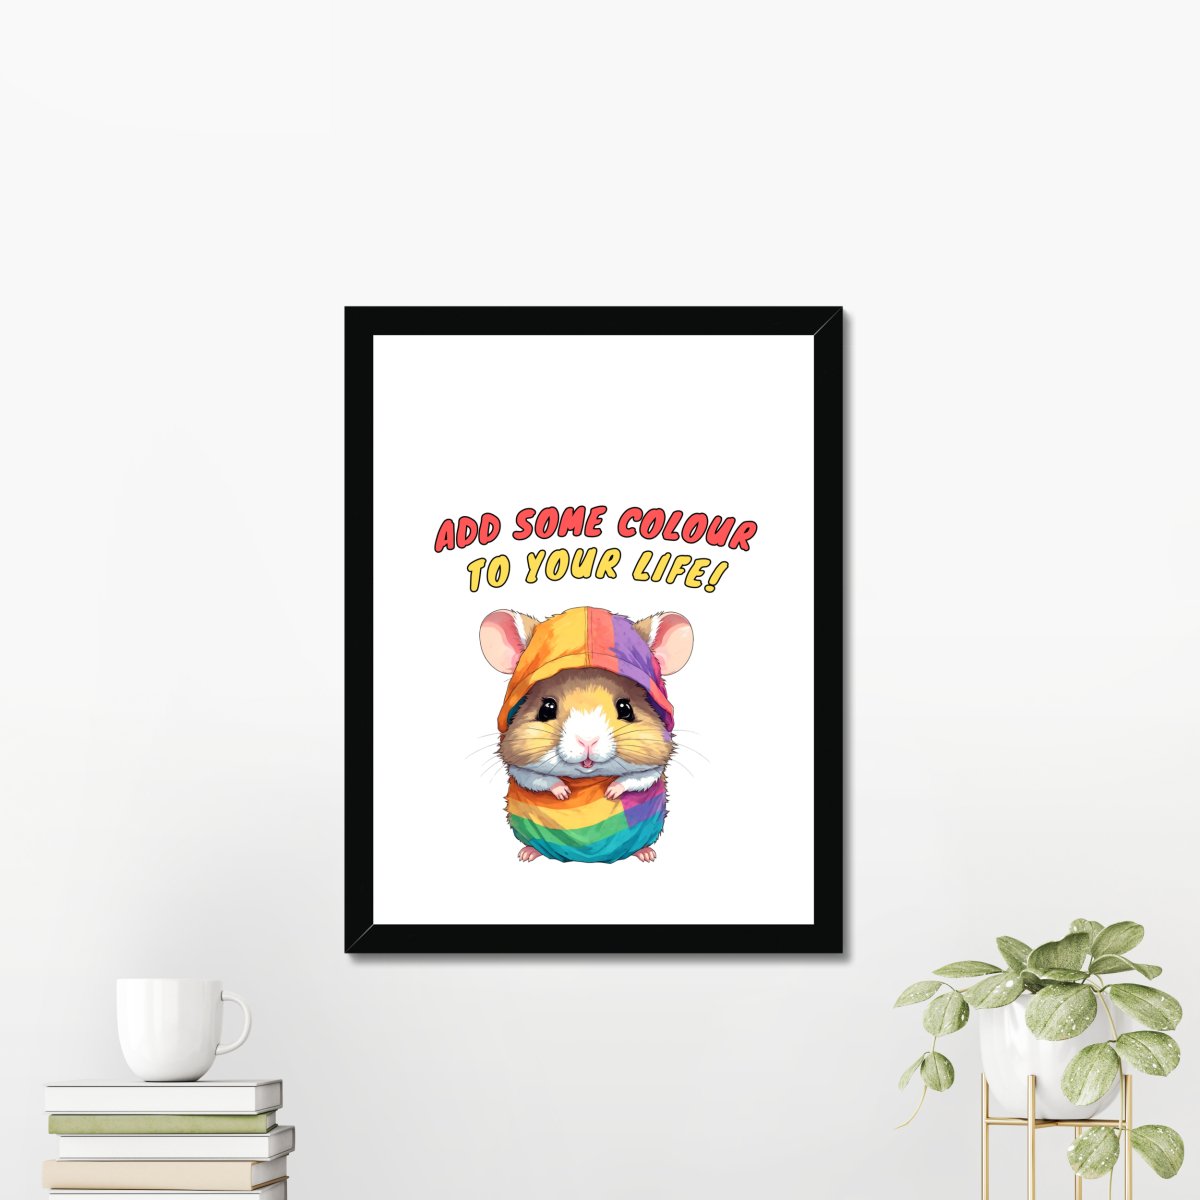 Colour to your life - Art print - Poster - Ever colorful